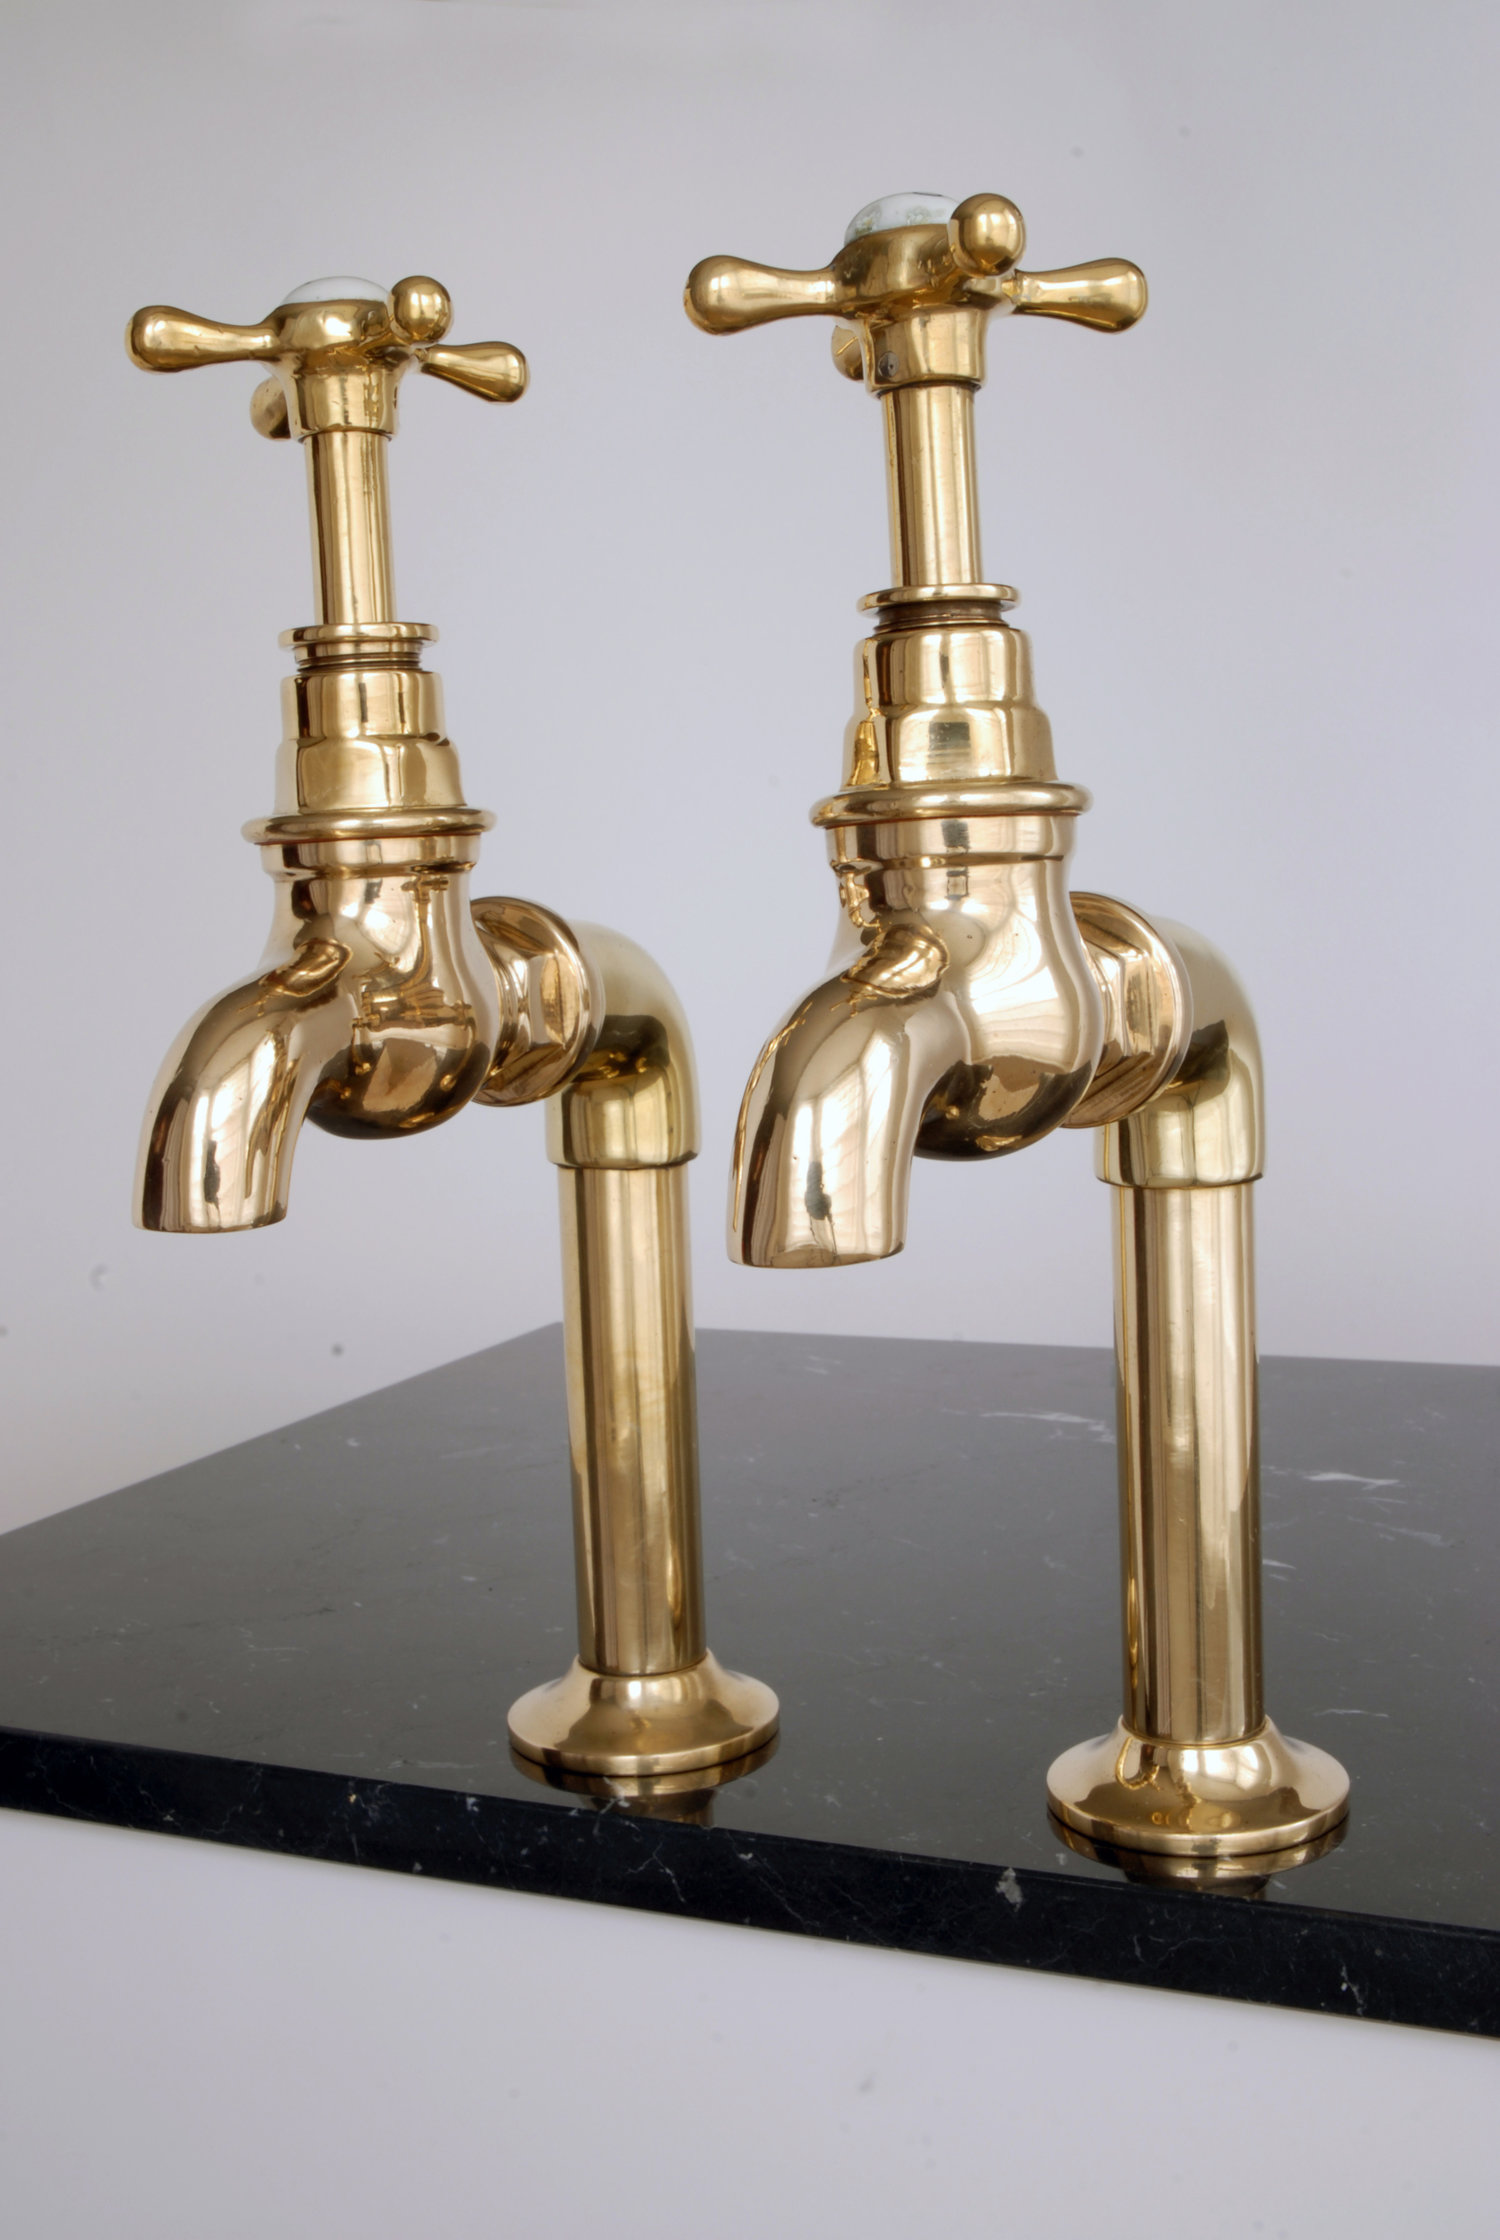 Vintage Brass Bib Taps Water And Wood, Antique Brass Bathroom Fittings